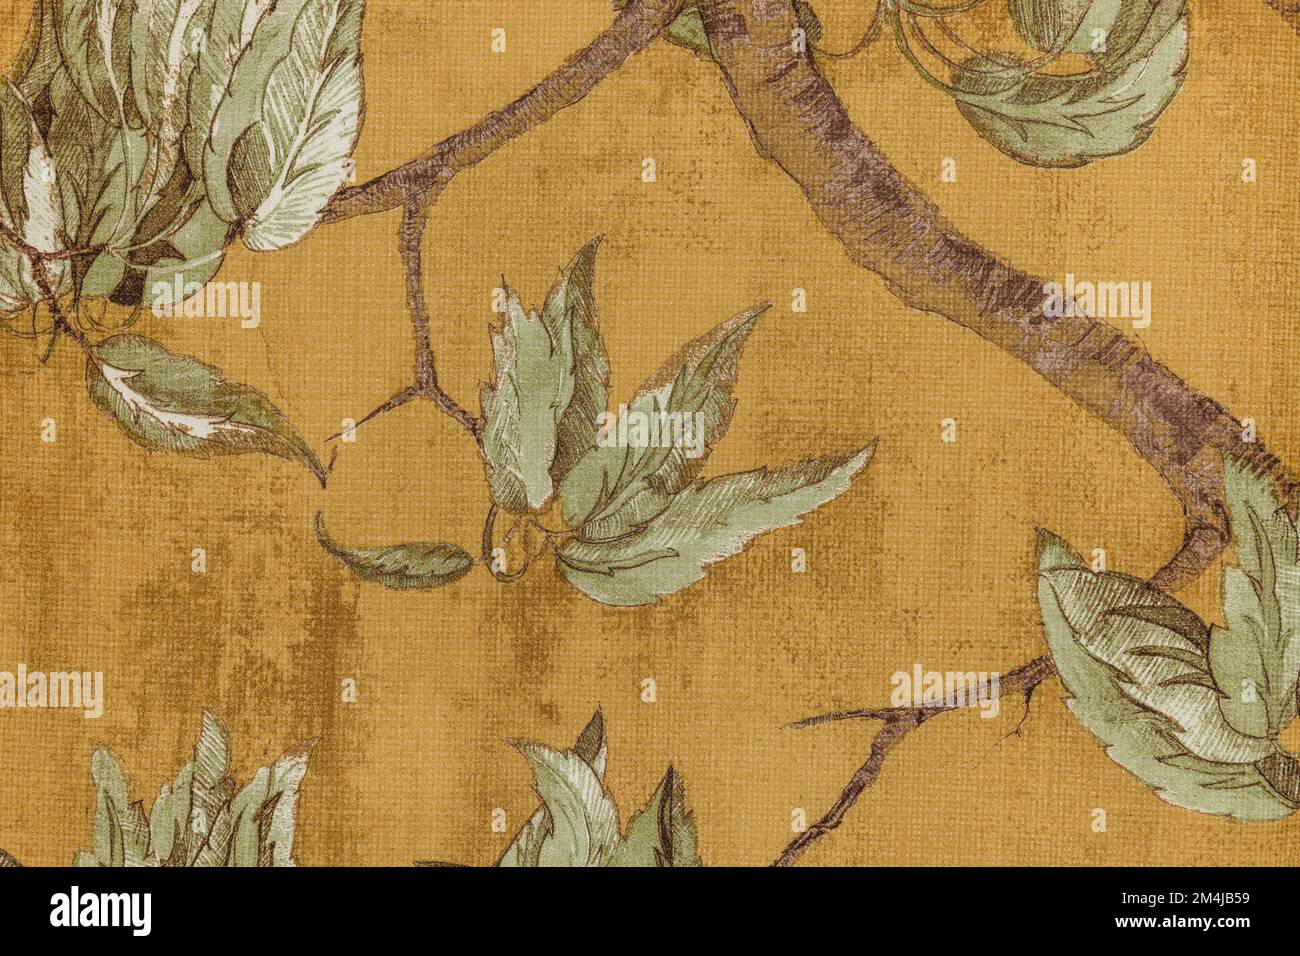 Leaves hand drawn pattern. Digital drawing and watercolor texture. Botanical wallcovering, wallpaper Stock Photo